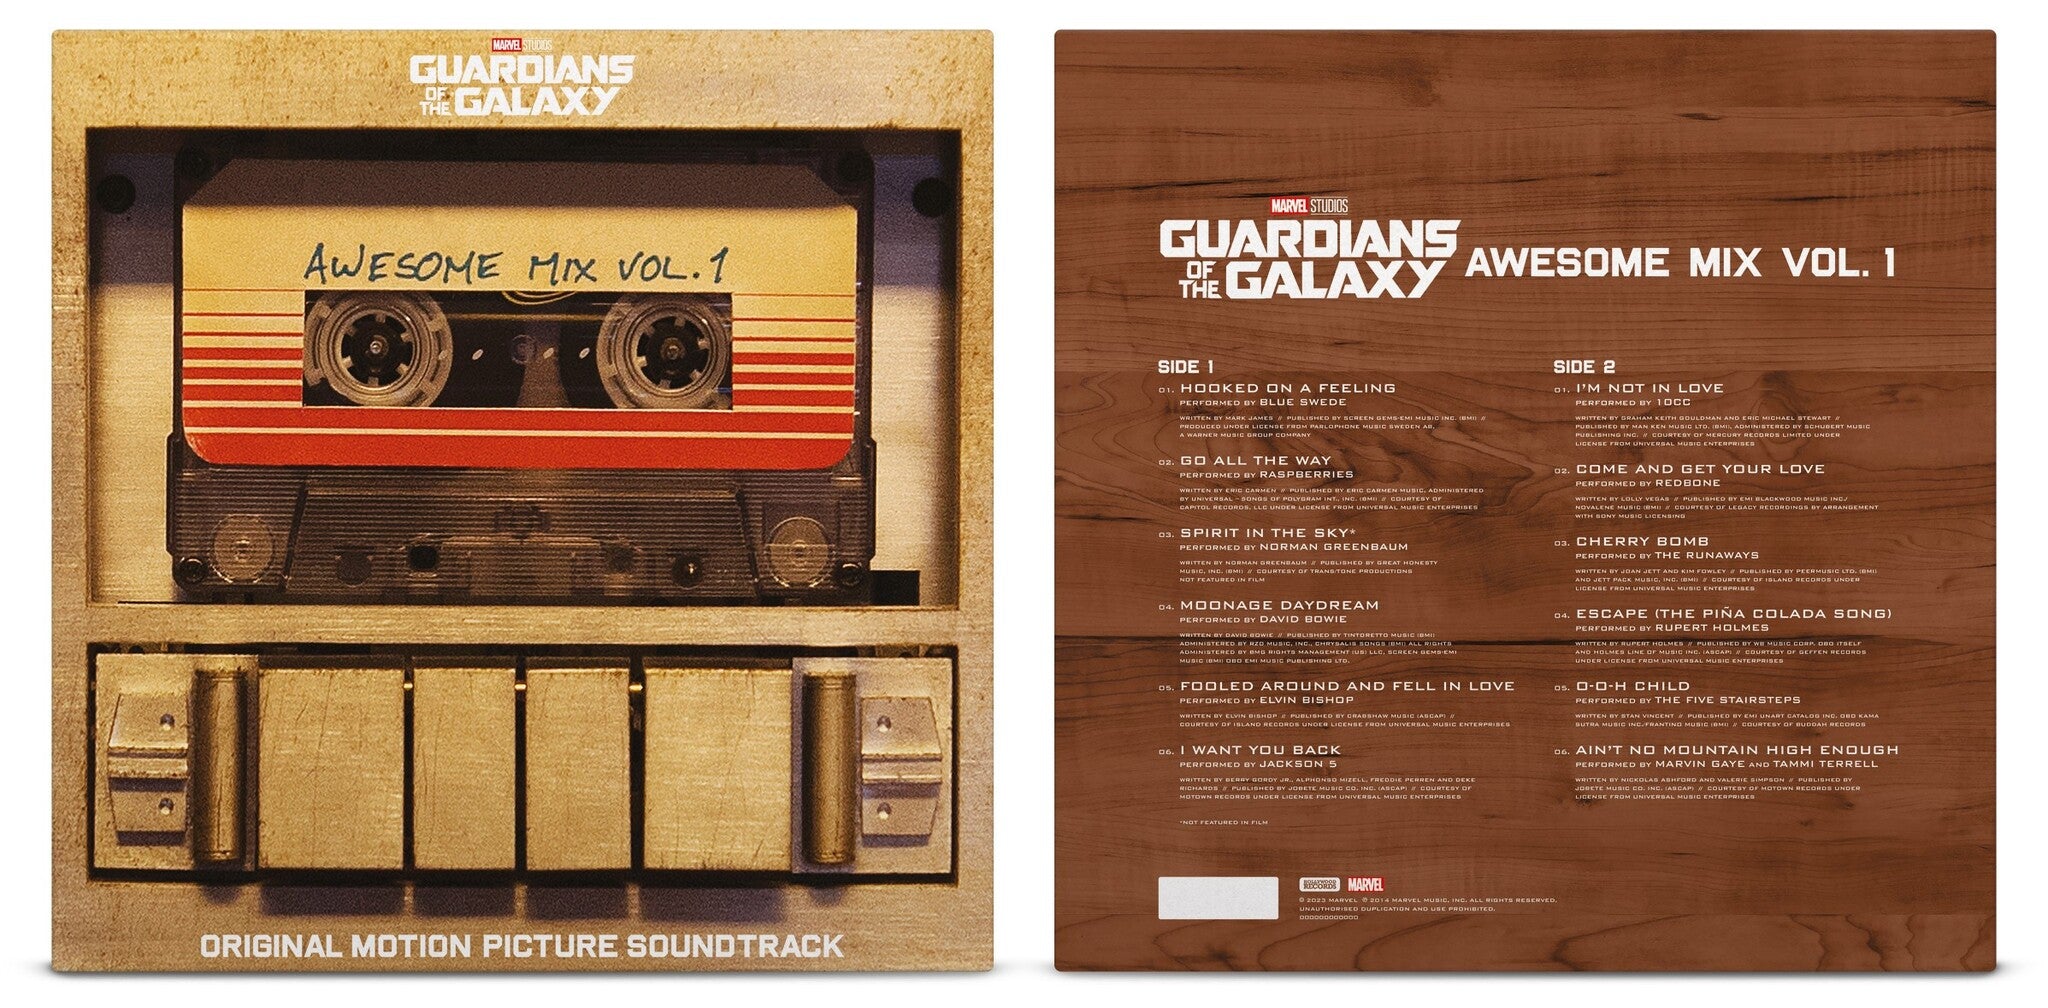 VARIOUS - Guardians Of The Galaxy: Awesome Mix Vol. 1 - LP - Cloudy Storm Coloured Vinyl